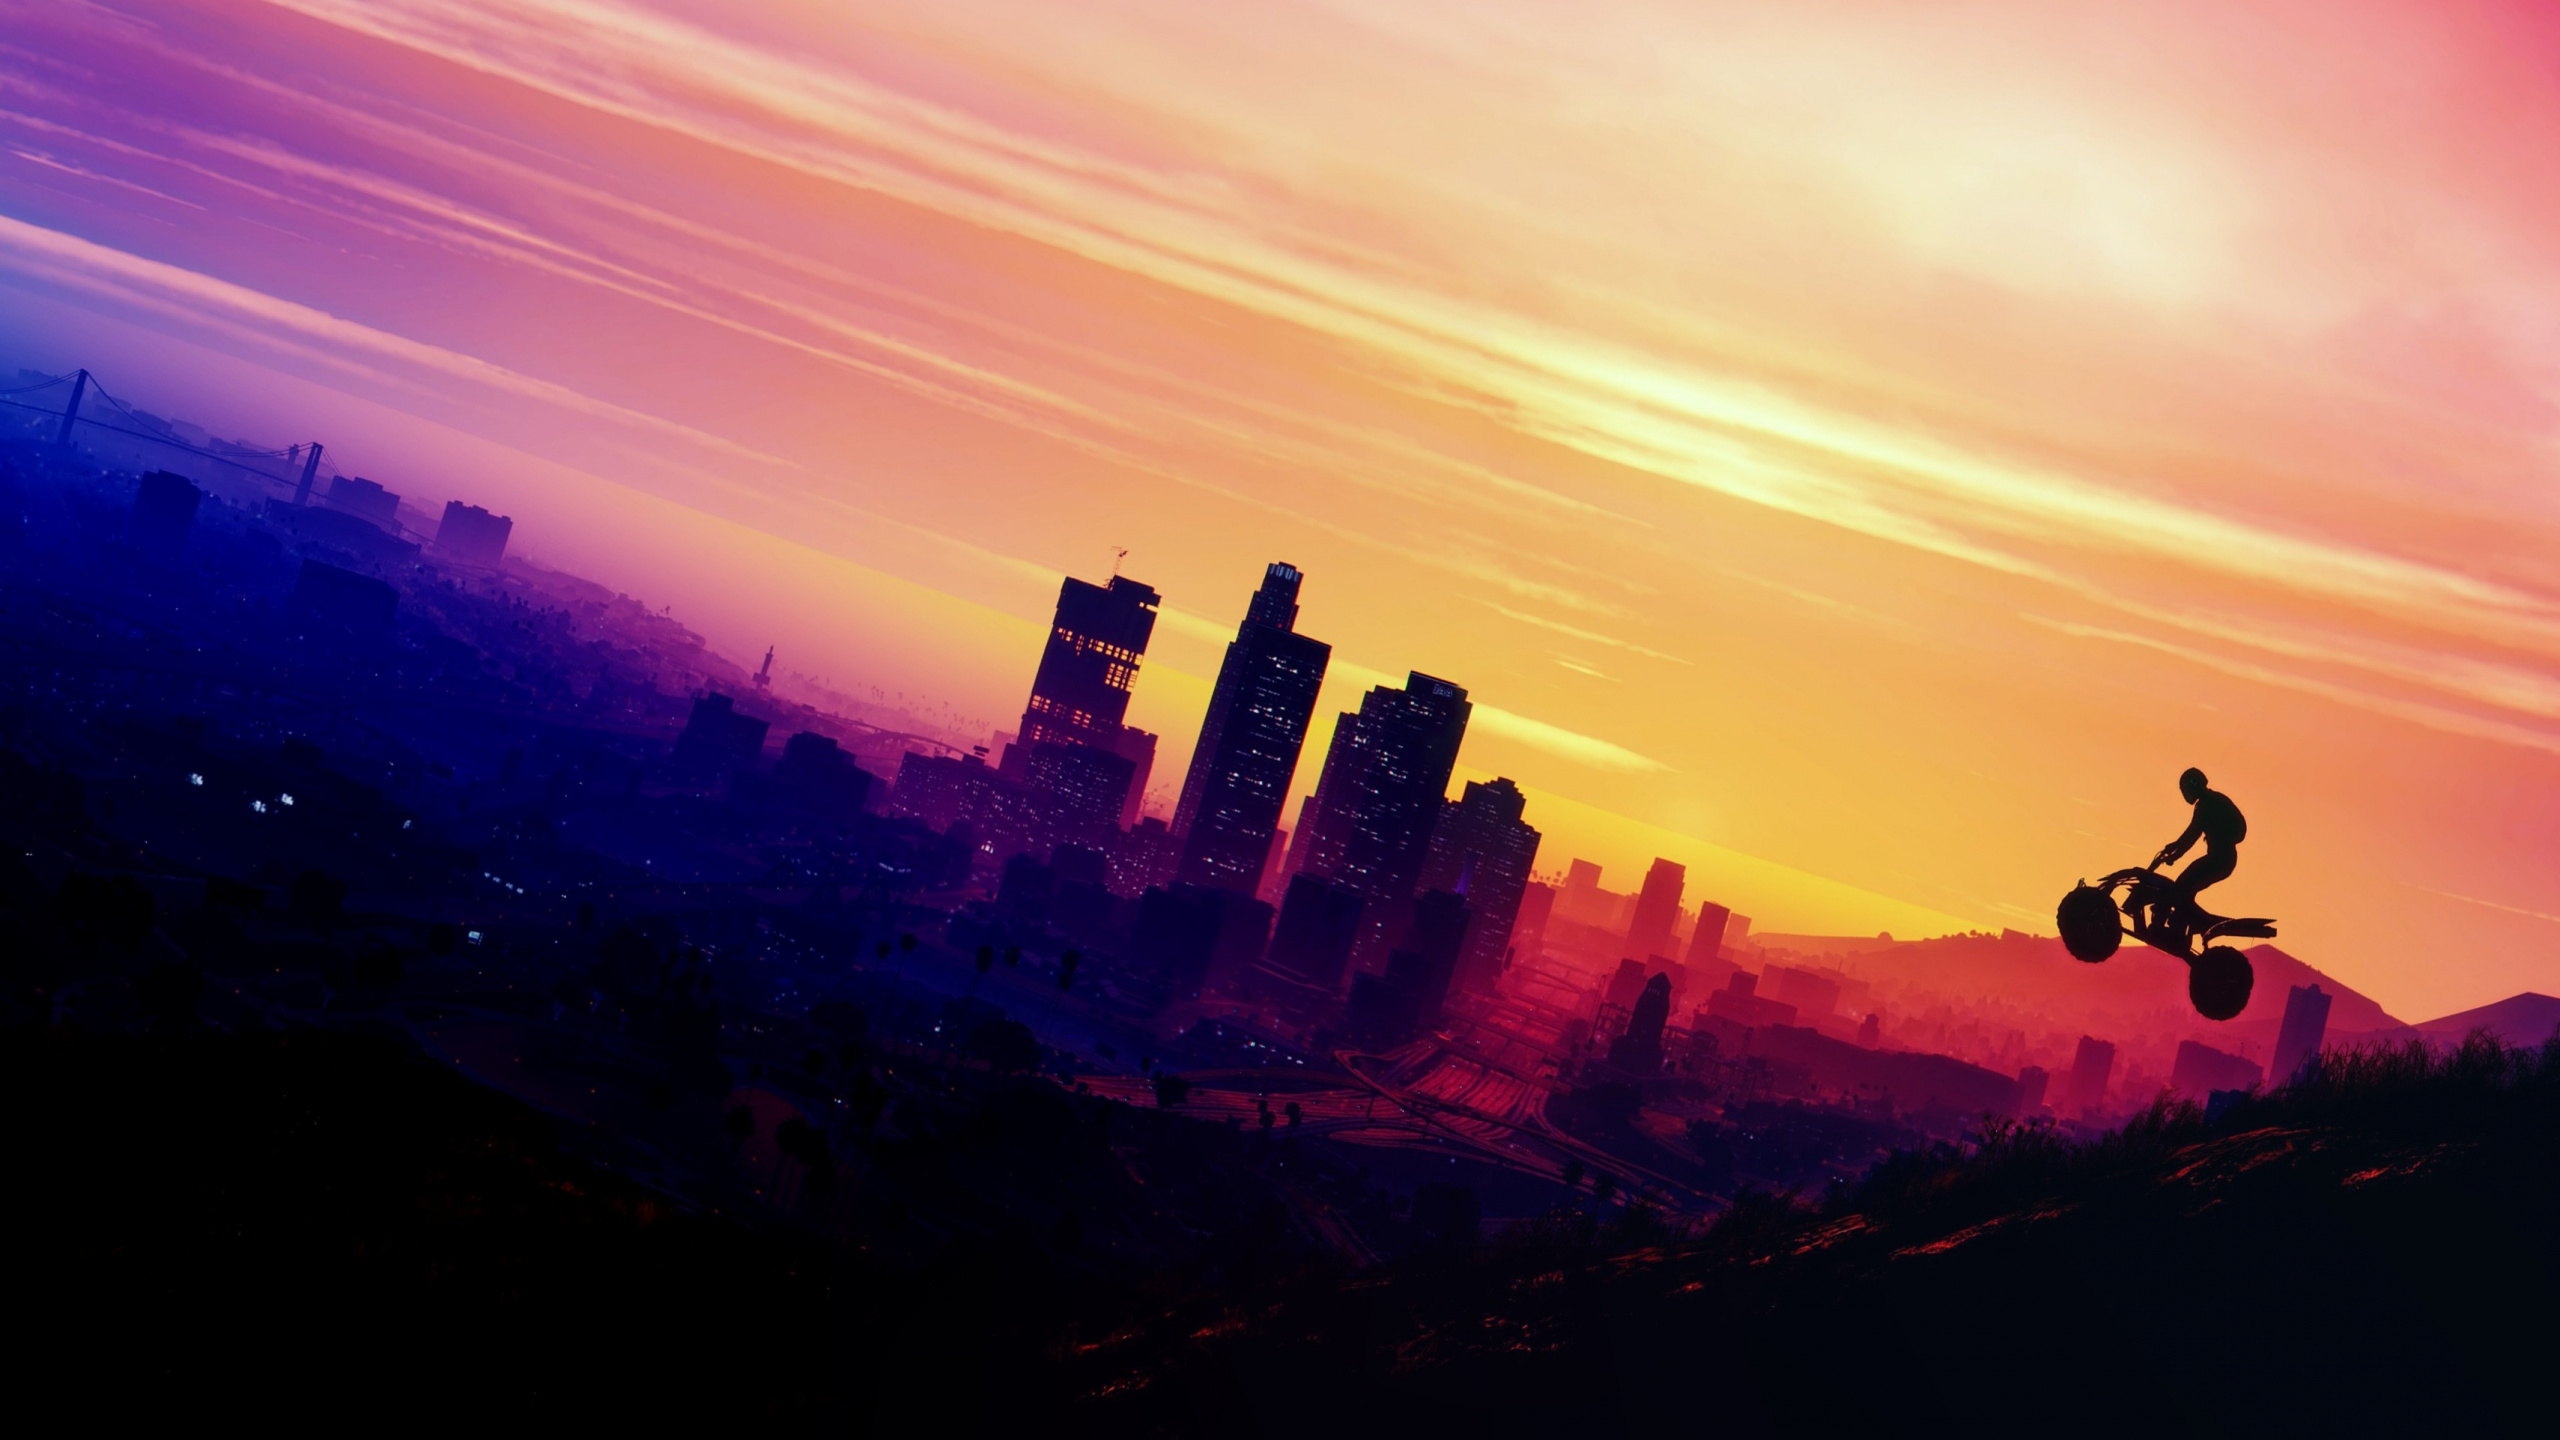 Grand Theft Auto v, Grand Theft Auto San Andreas, Horizont, Afterglow, Sonnenuntergang. Wallpaper in 2560x1440 Resolution